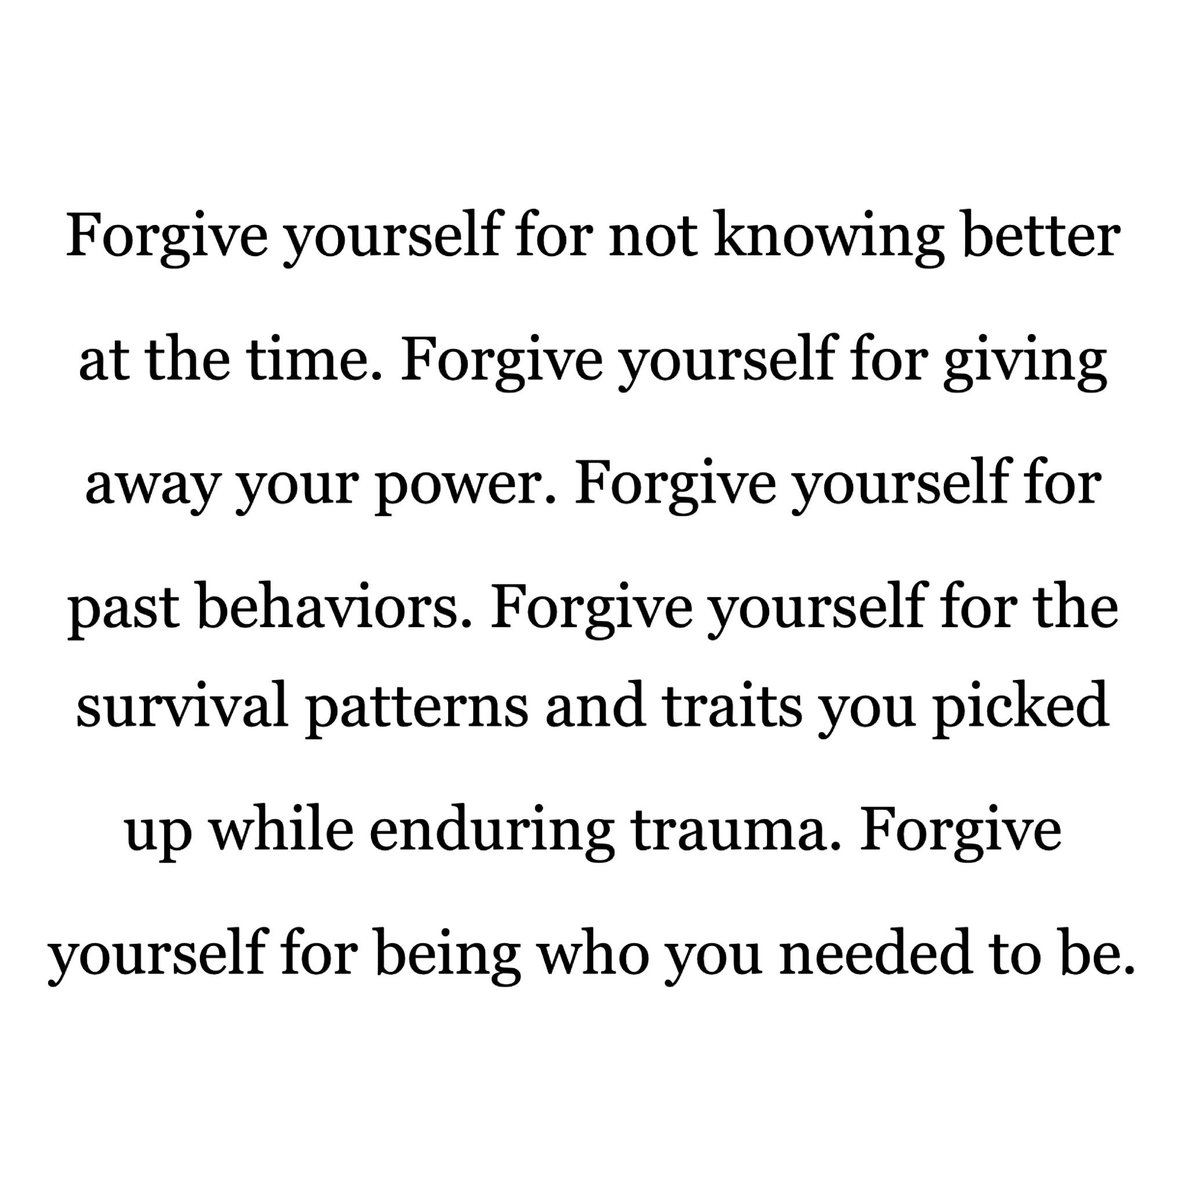 I've always blamed myself for my ED and been ashamed about the hurt it's causing my family. Realizing the trauma and that developing anorexia as my way to cope was not my fault, gives me peace and can hopefully help me forgive myself one day
#edrecovery #anorexiawarrior #trauma